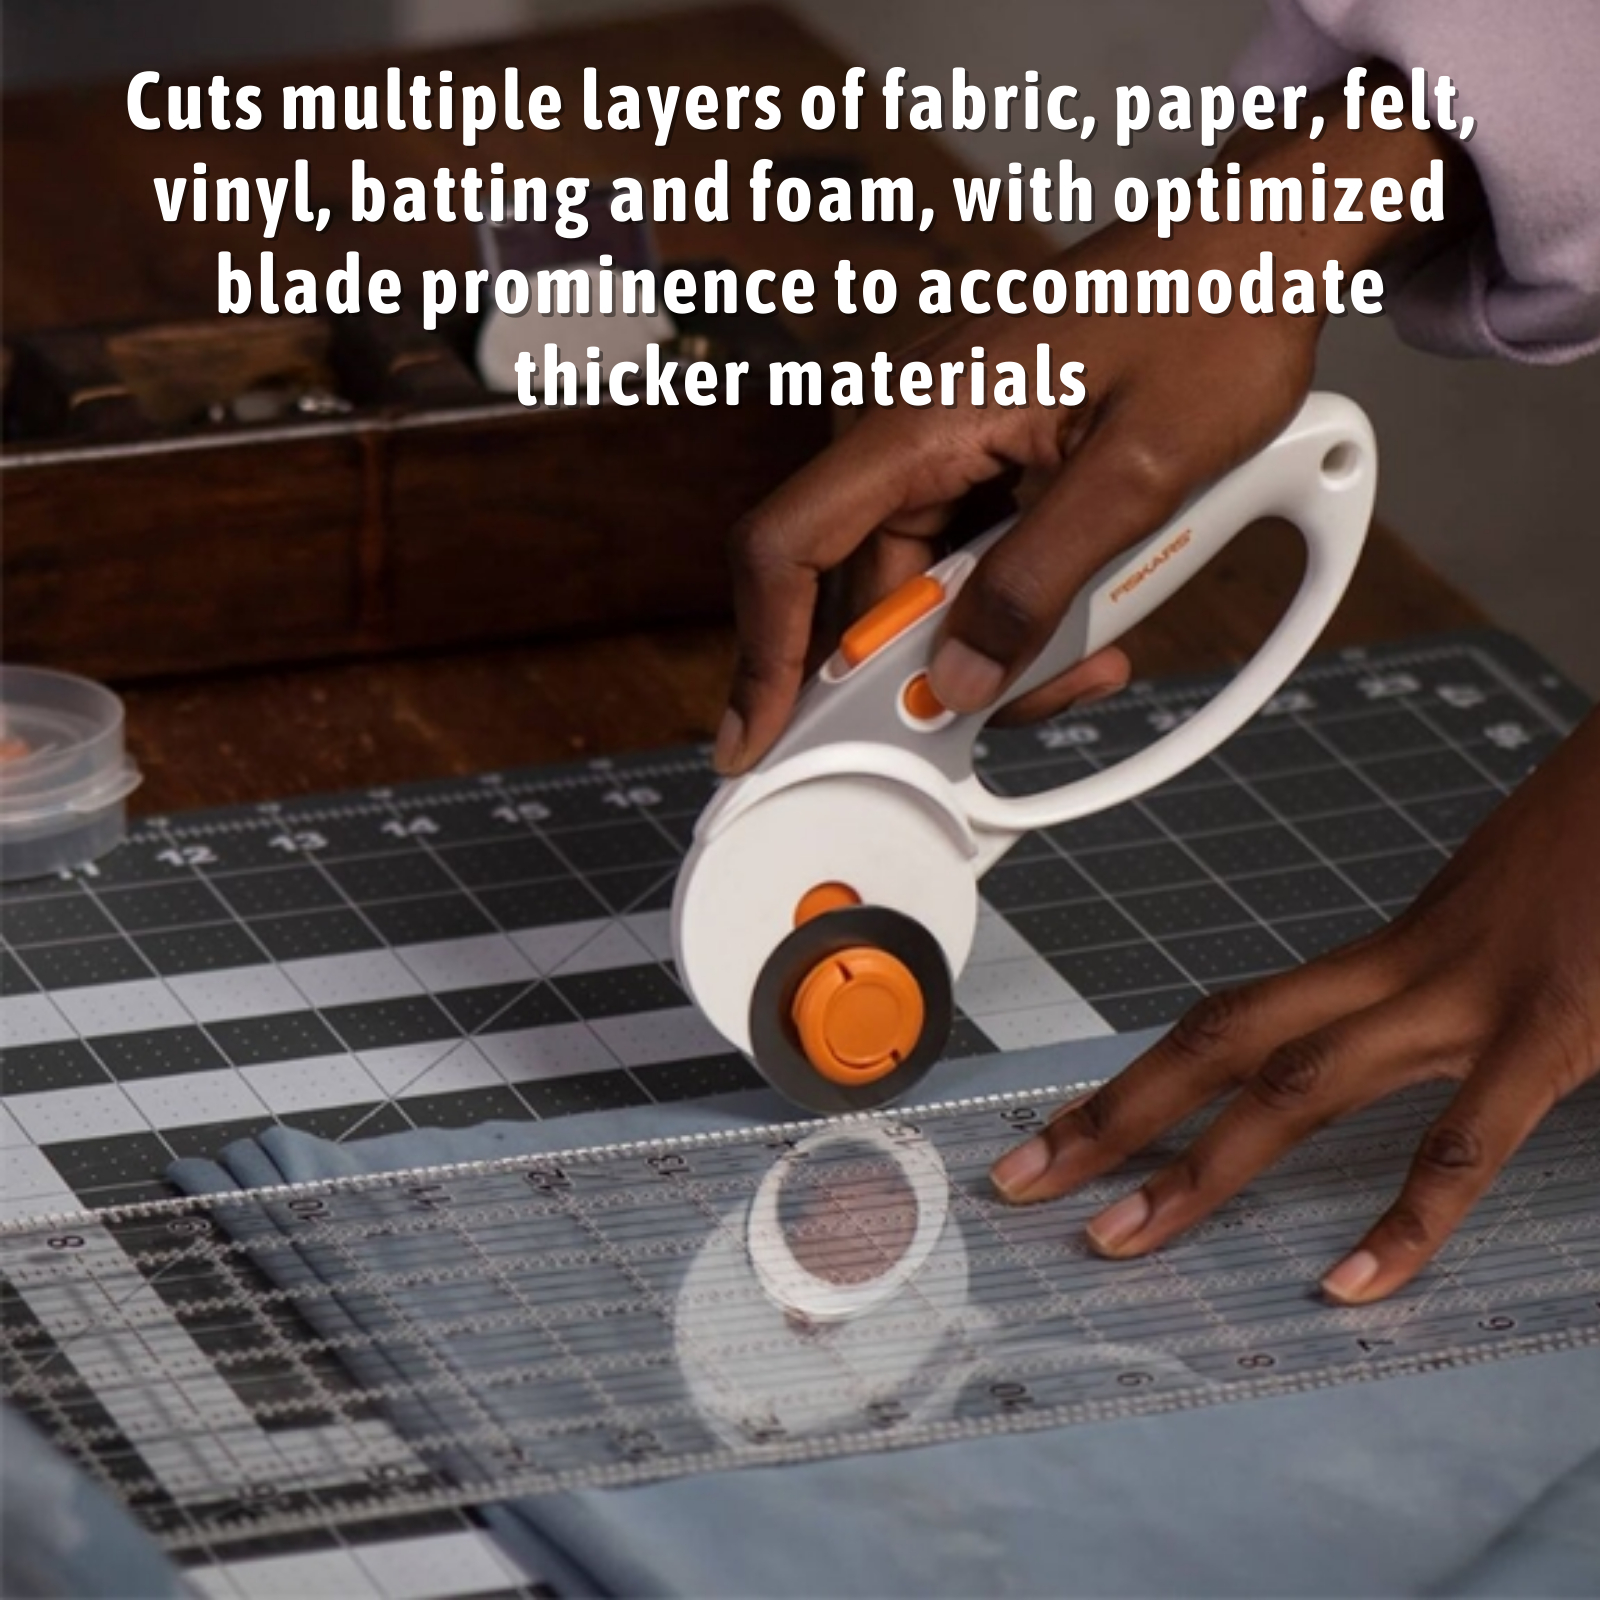 Fiskars 45 mm, 60 mm Rotary Cutter Blade, Easy Change DuoLoop - Cuts multiple layers of fabric, paper, felt, vinyl & more